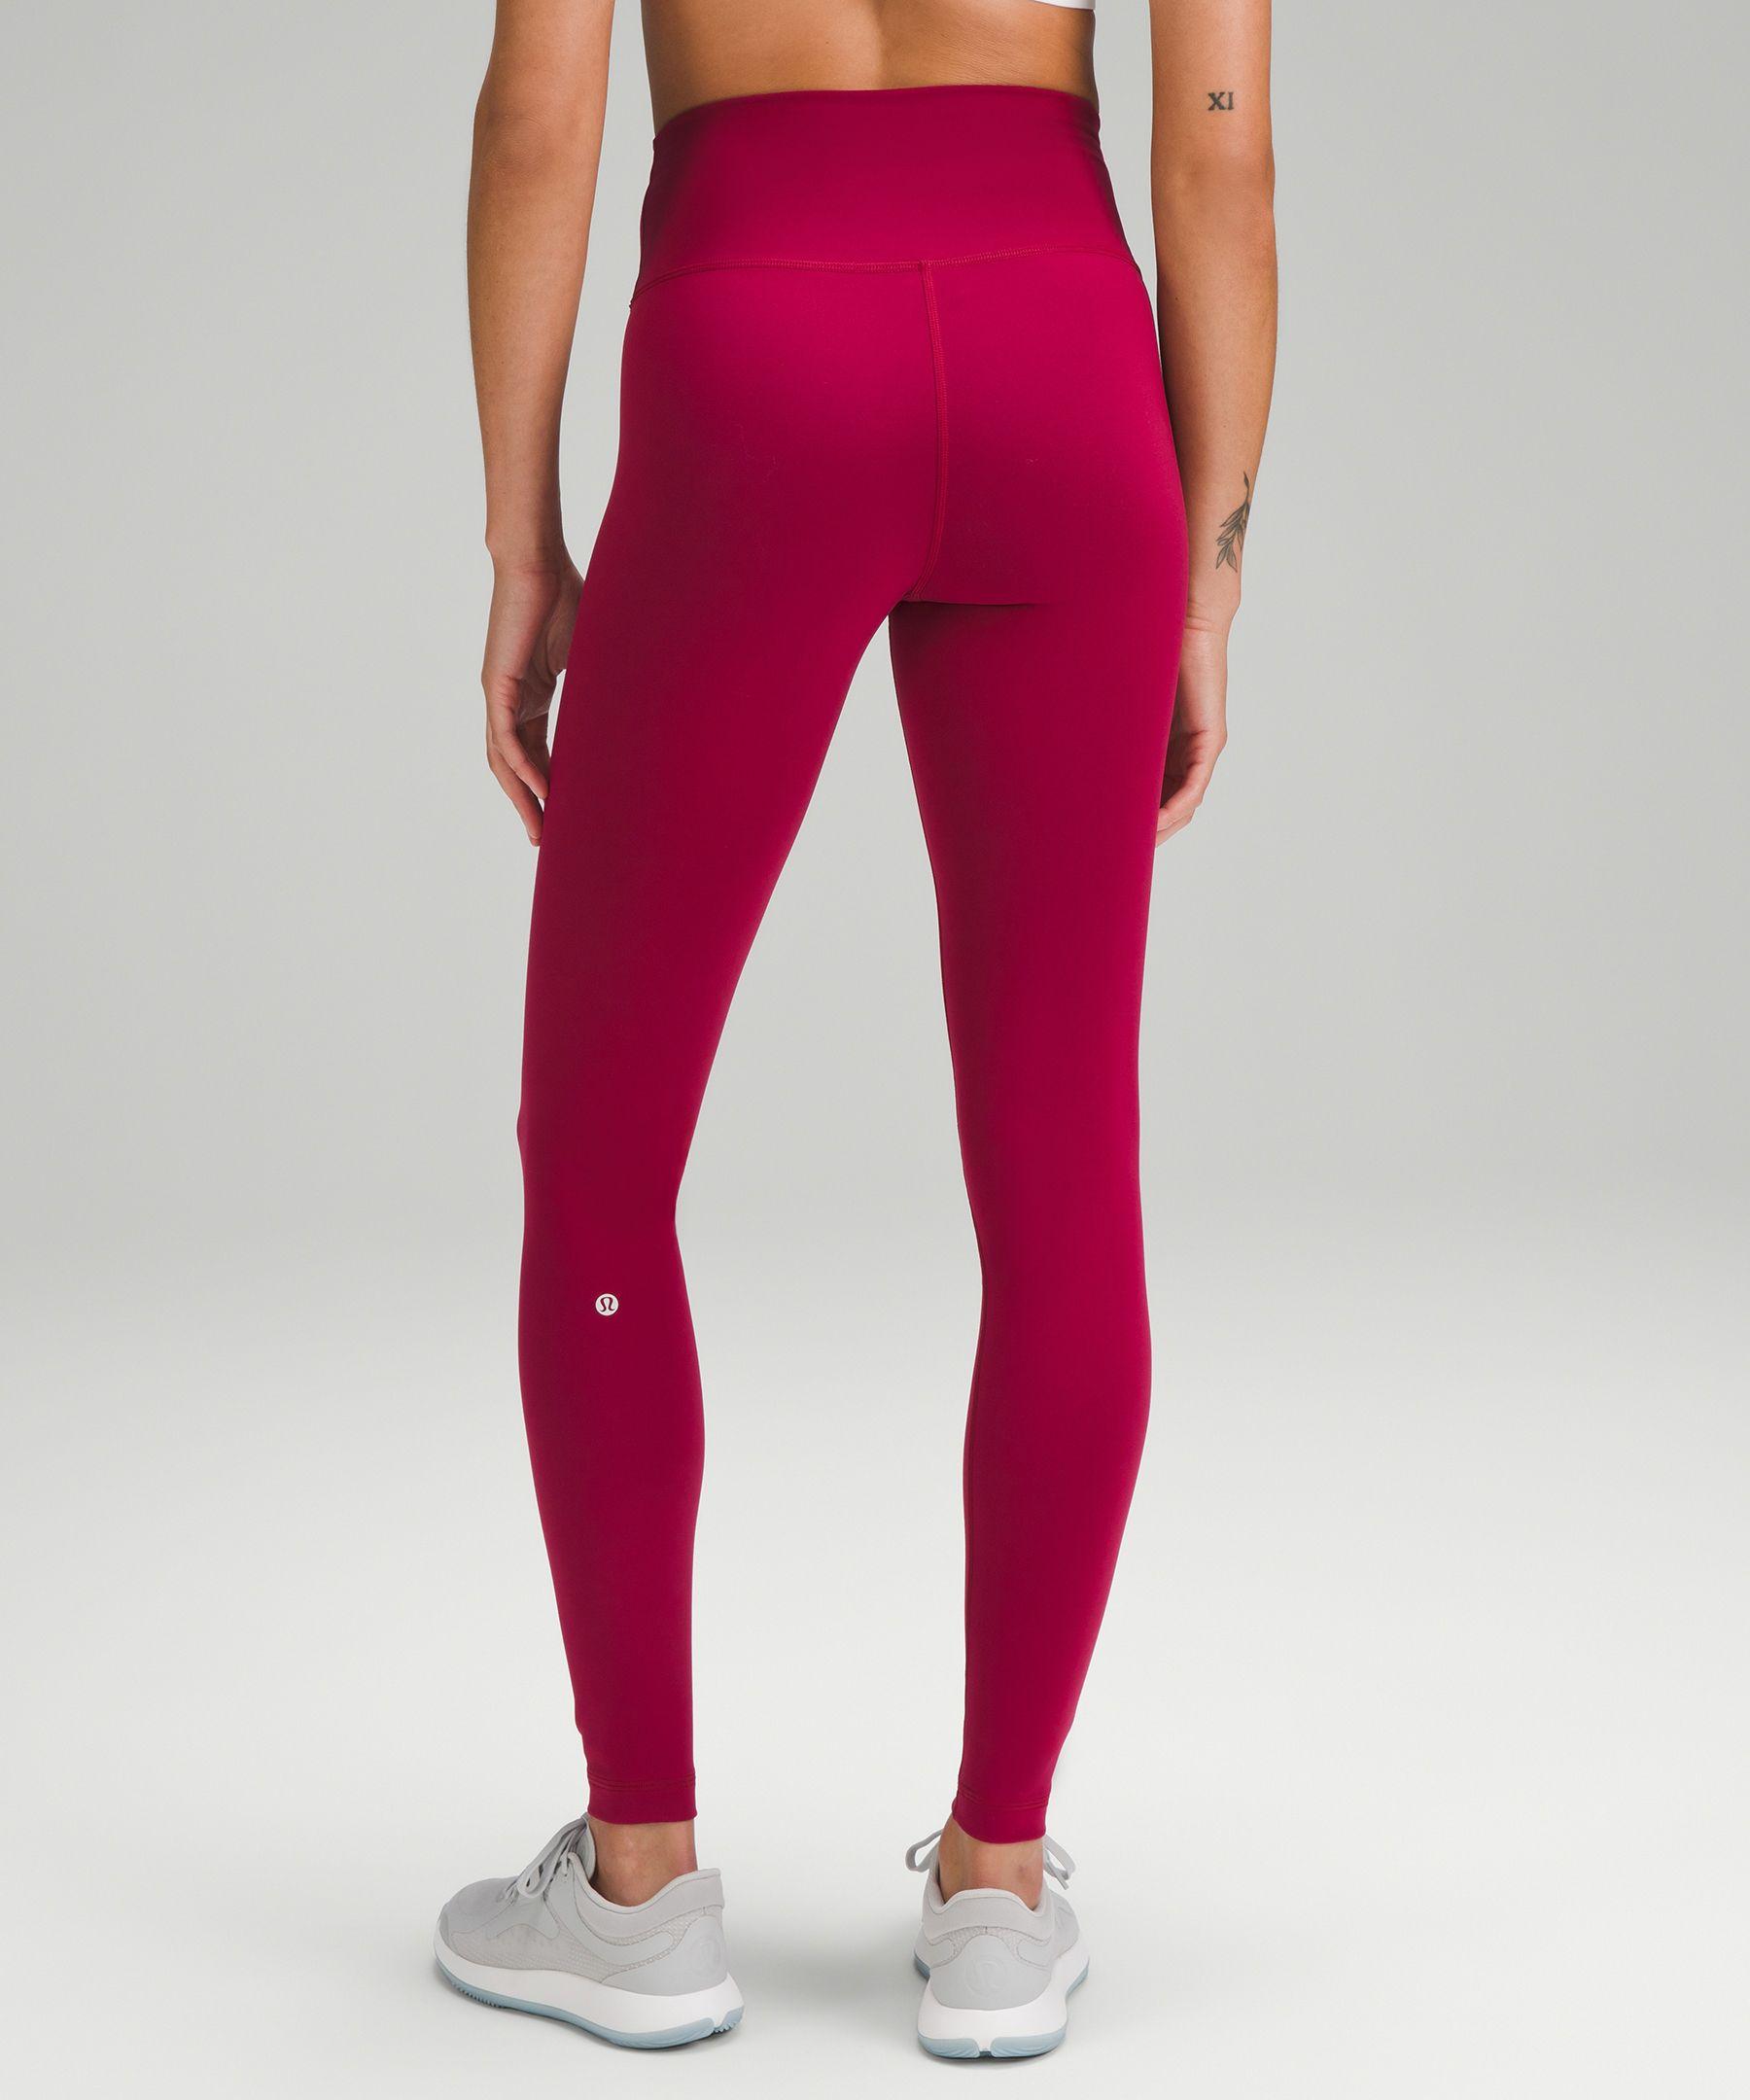 lululemon athletica Wunder Train High-rise Tight Leggings - 28 - Color  Pink - Size 0 in Red